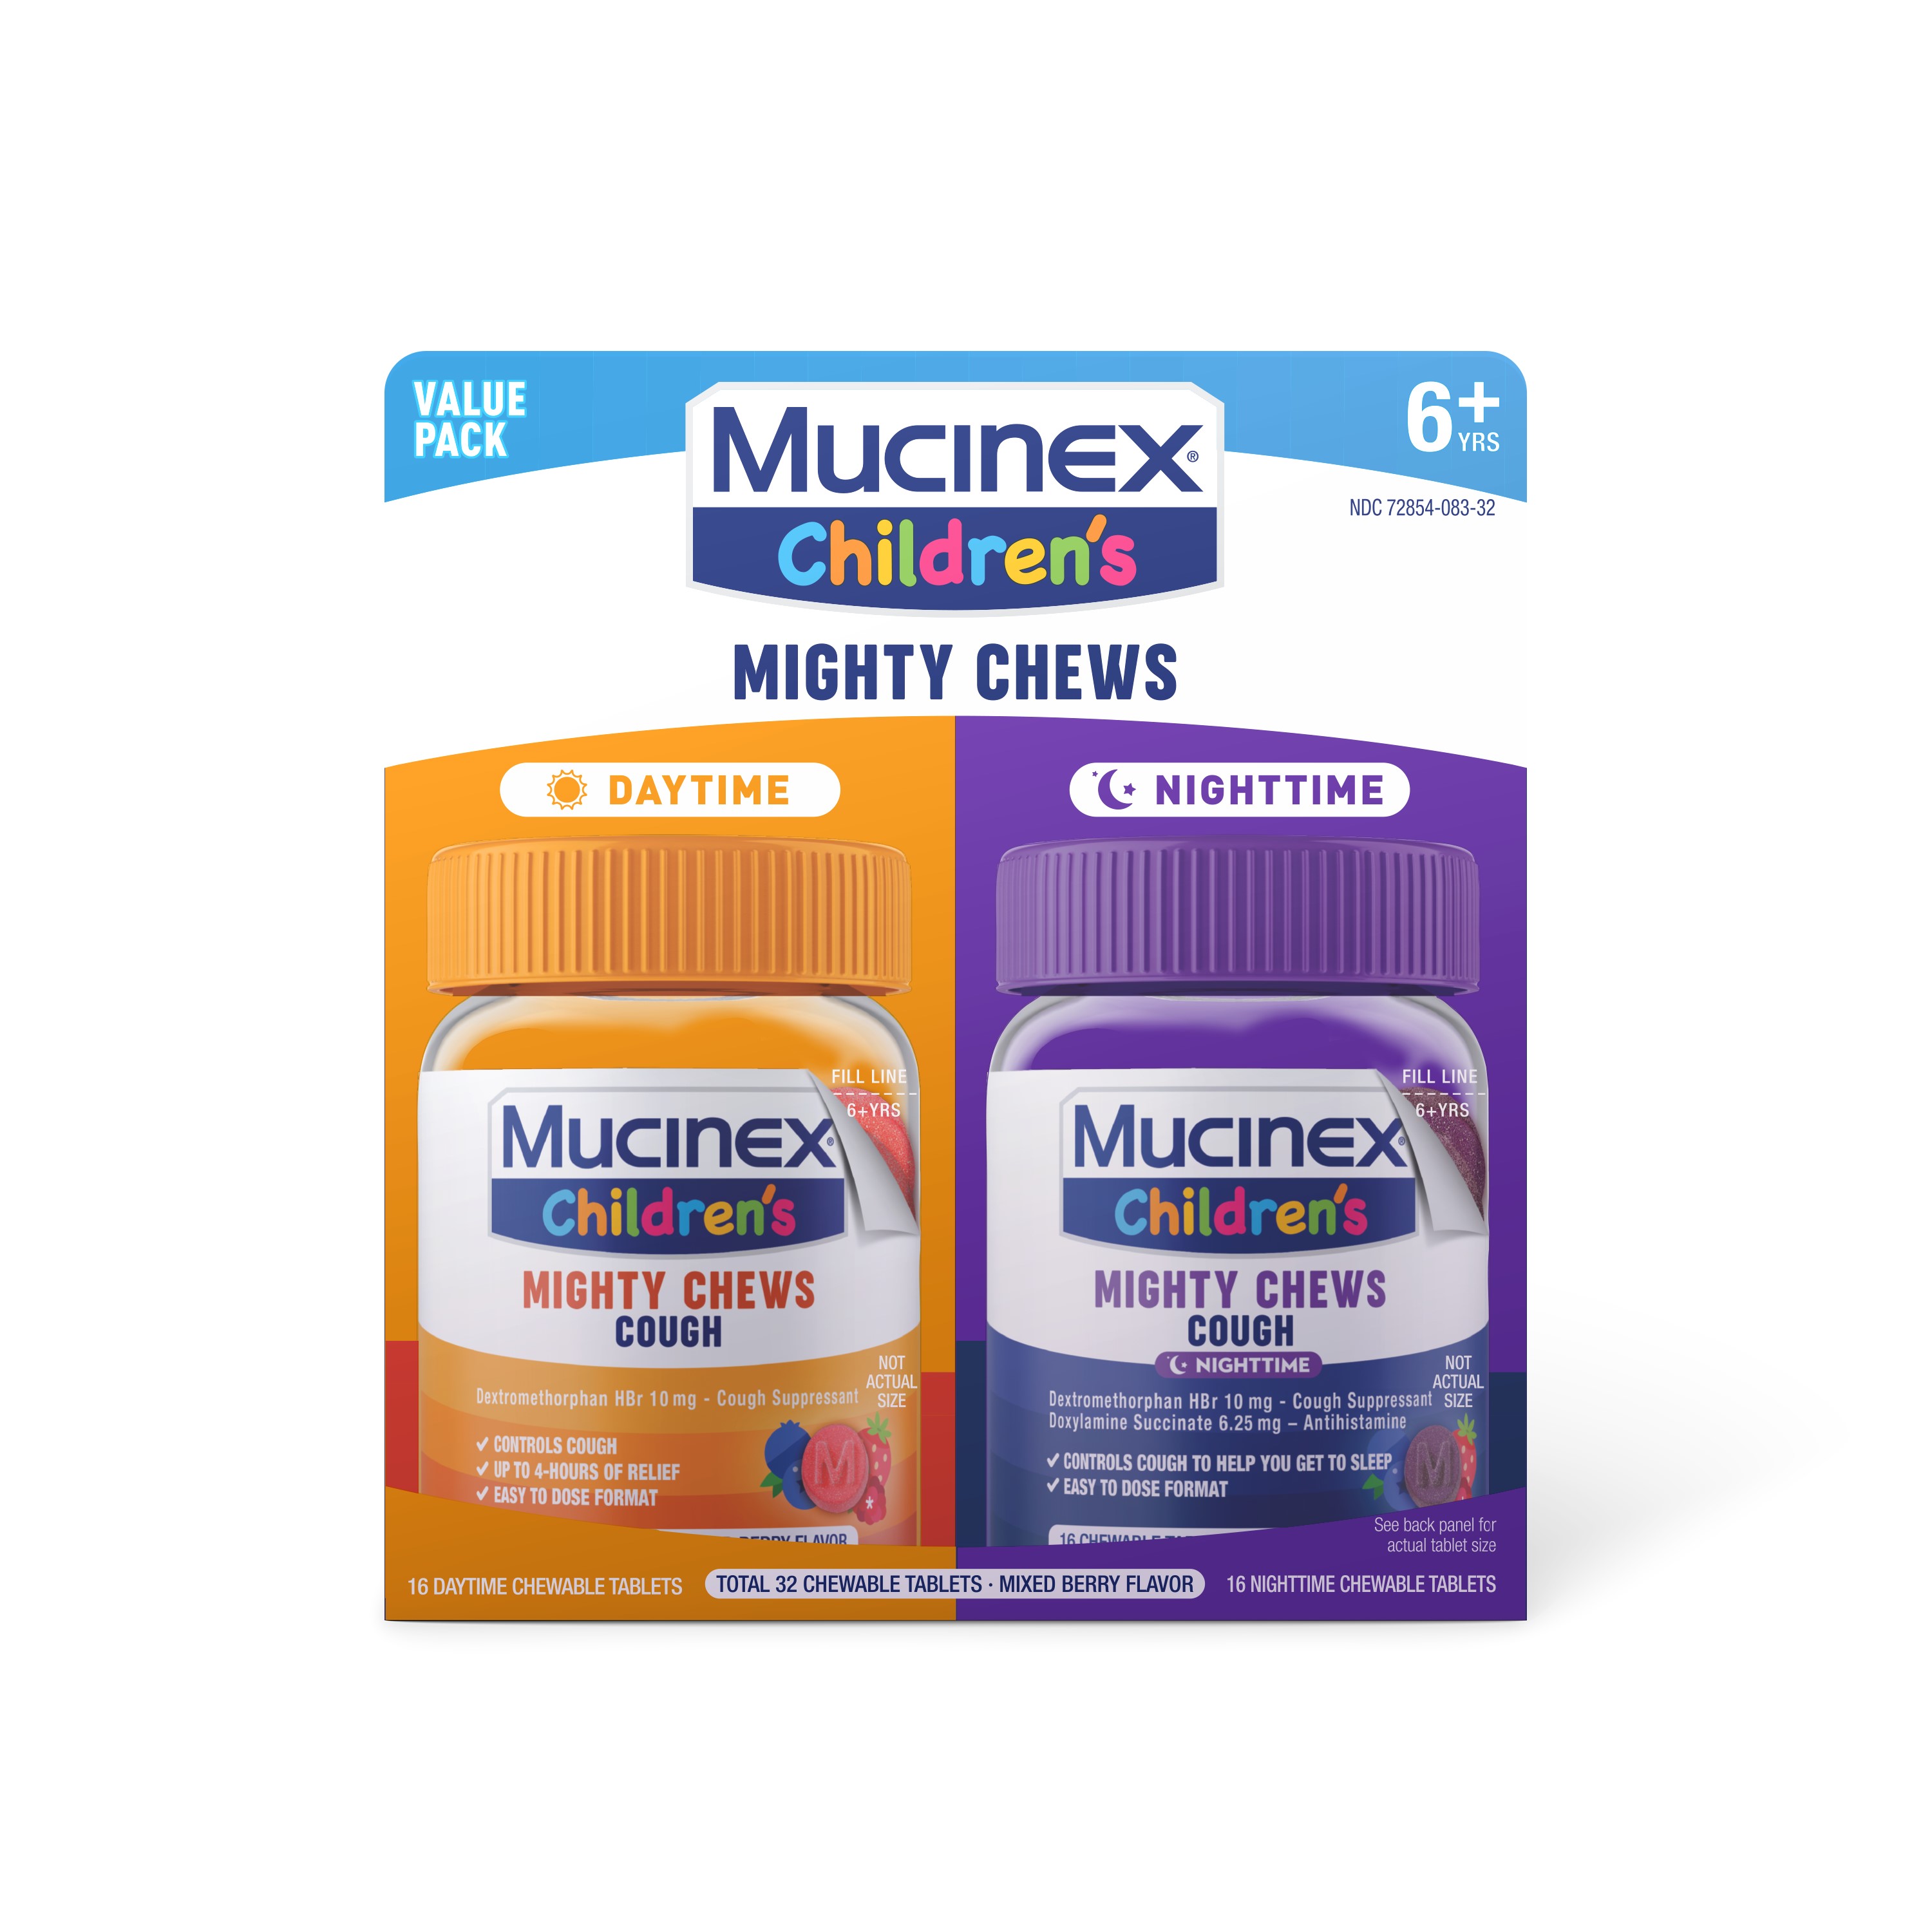 MUCINEX Childrens Mighty Chews  Cough Combo Pack Nighttime